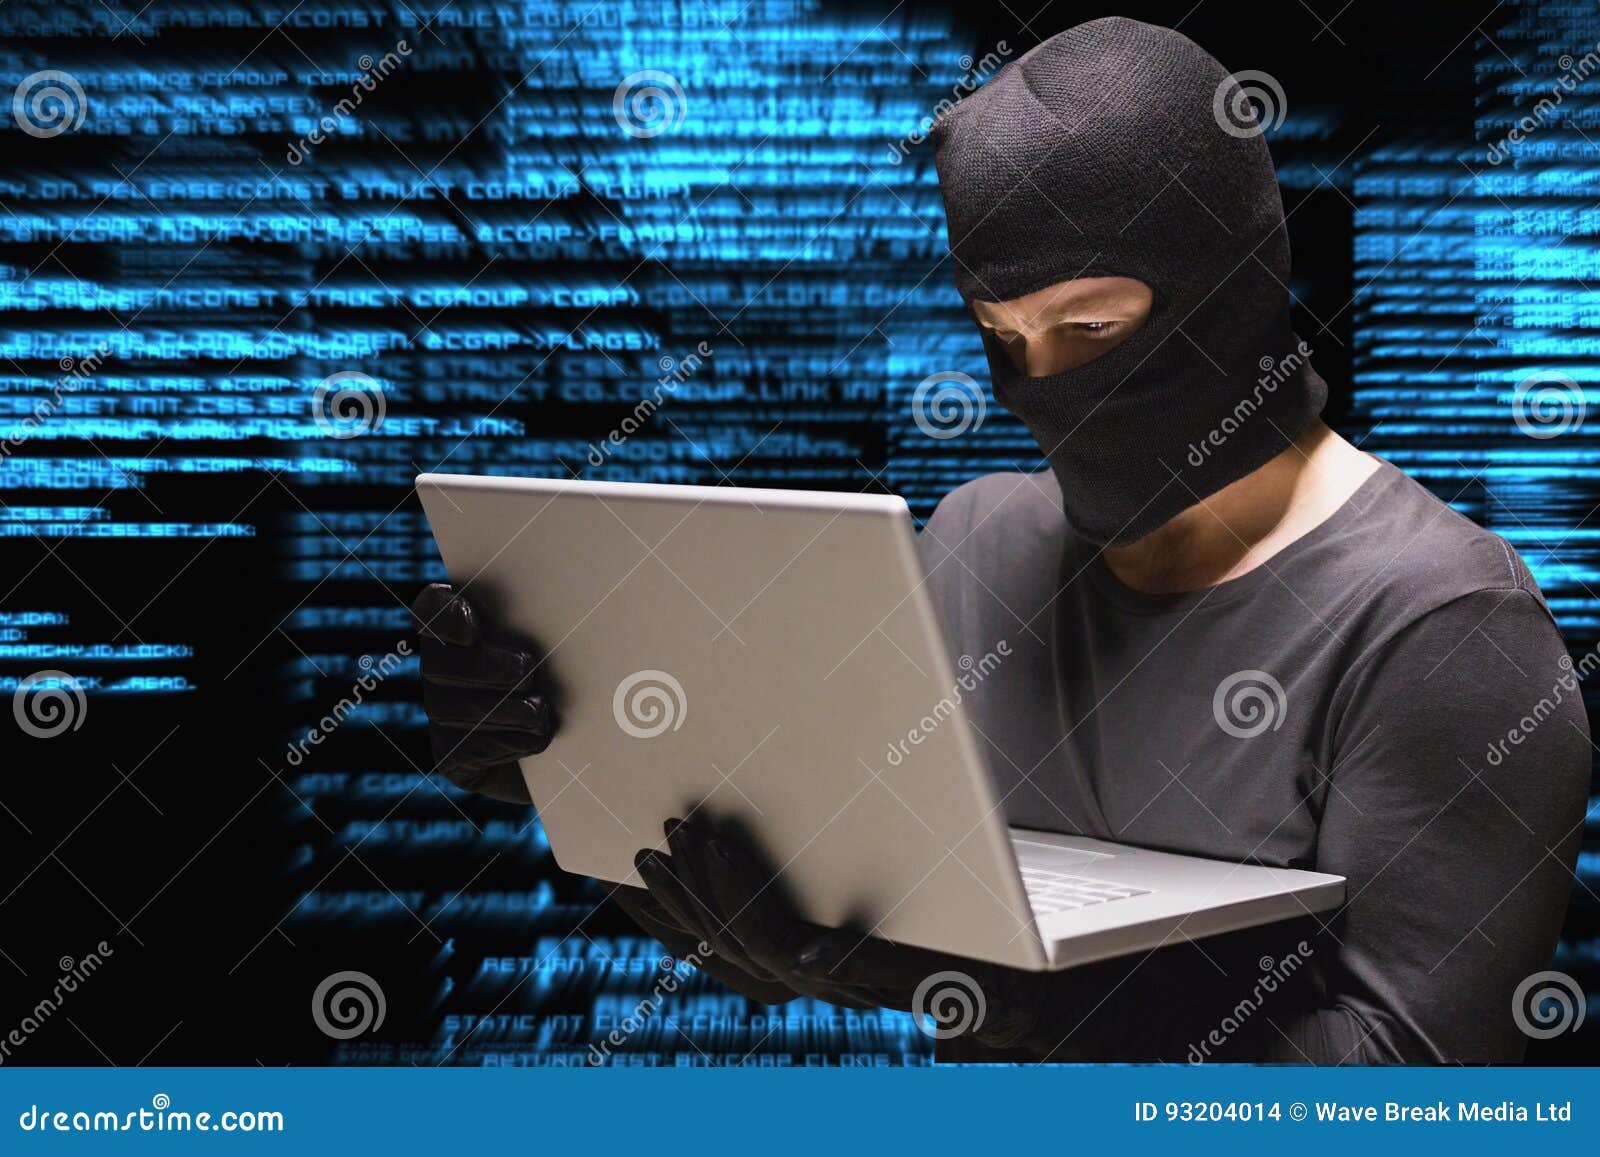 Cyber Criminal is Hacking from a Laptop Against Matrix Code Rain